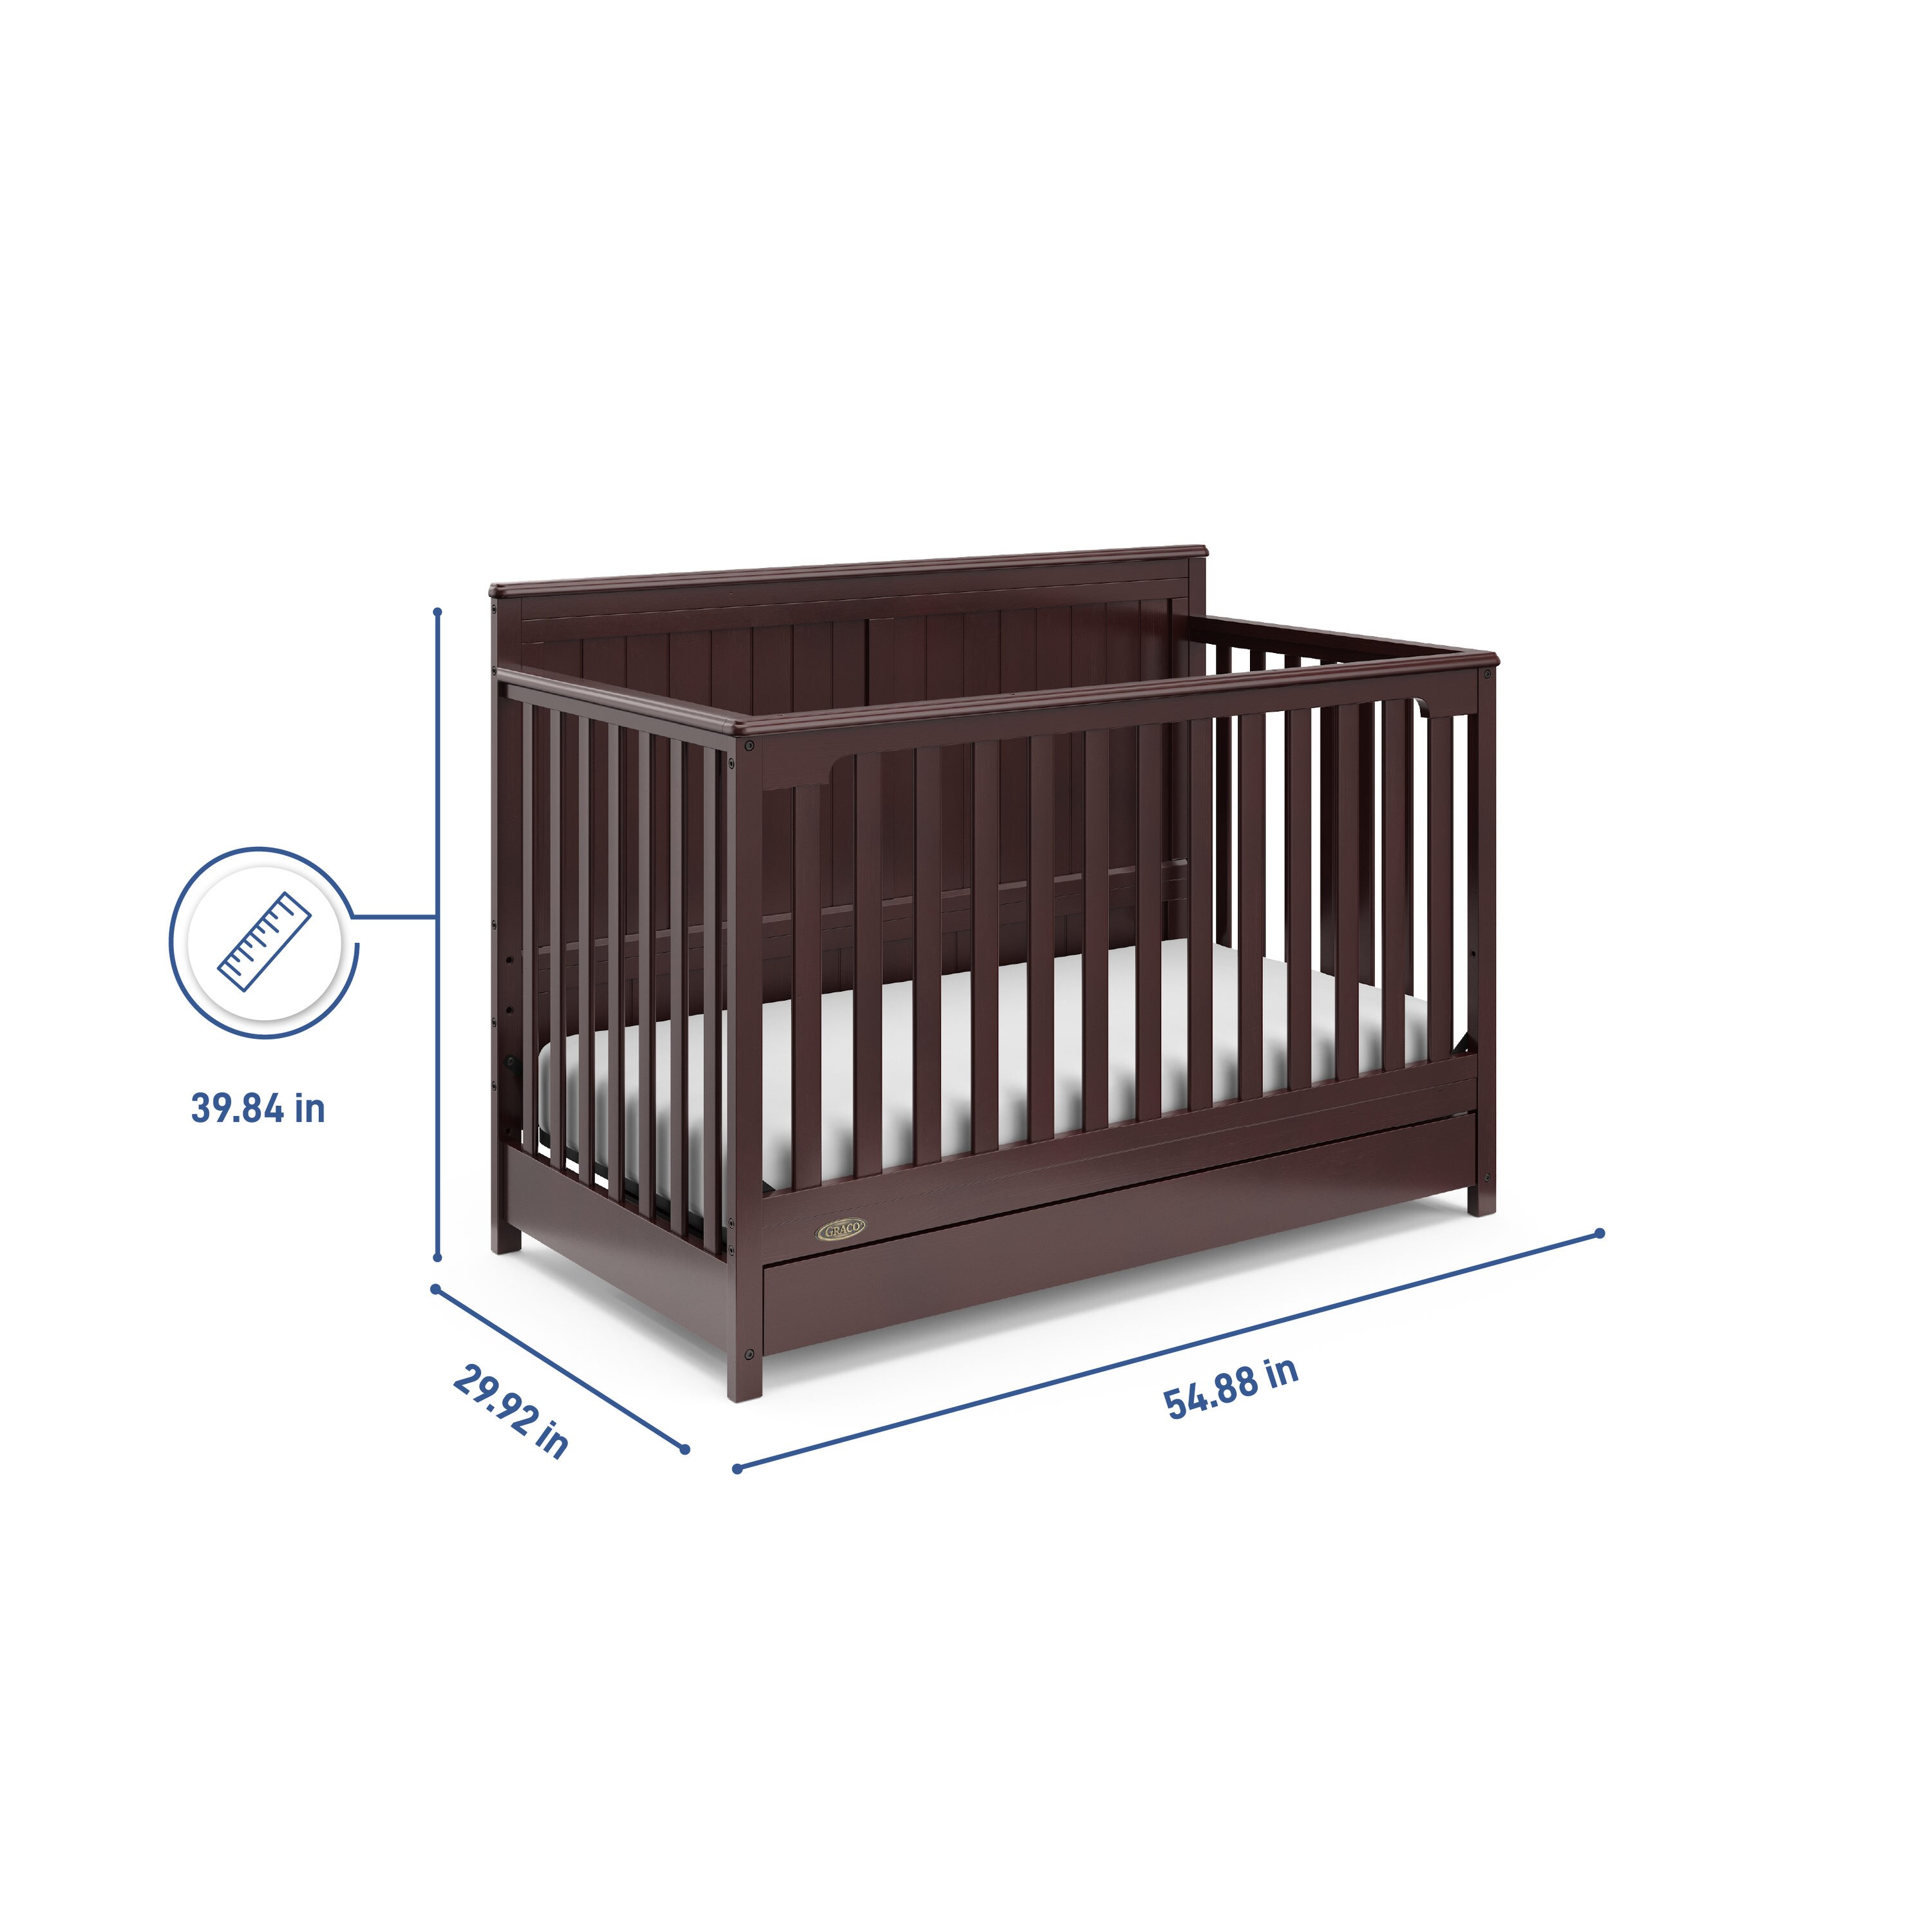 Graco Cribs at Lowes.com